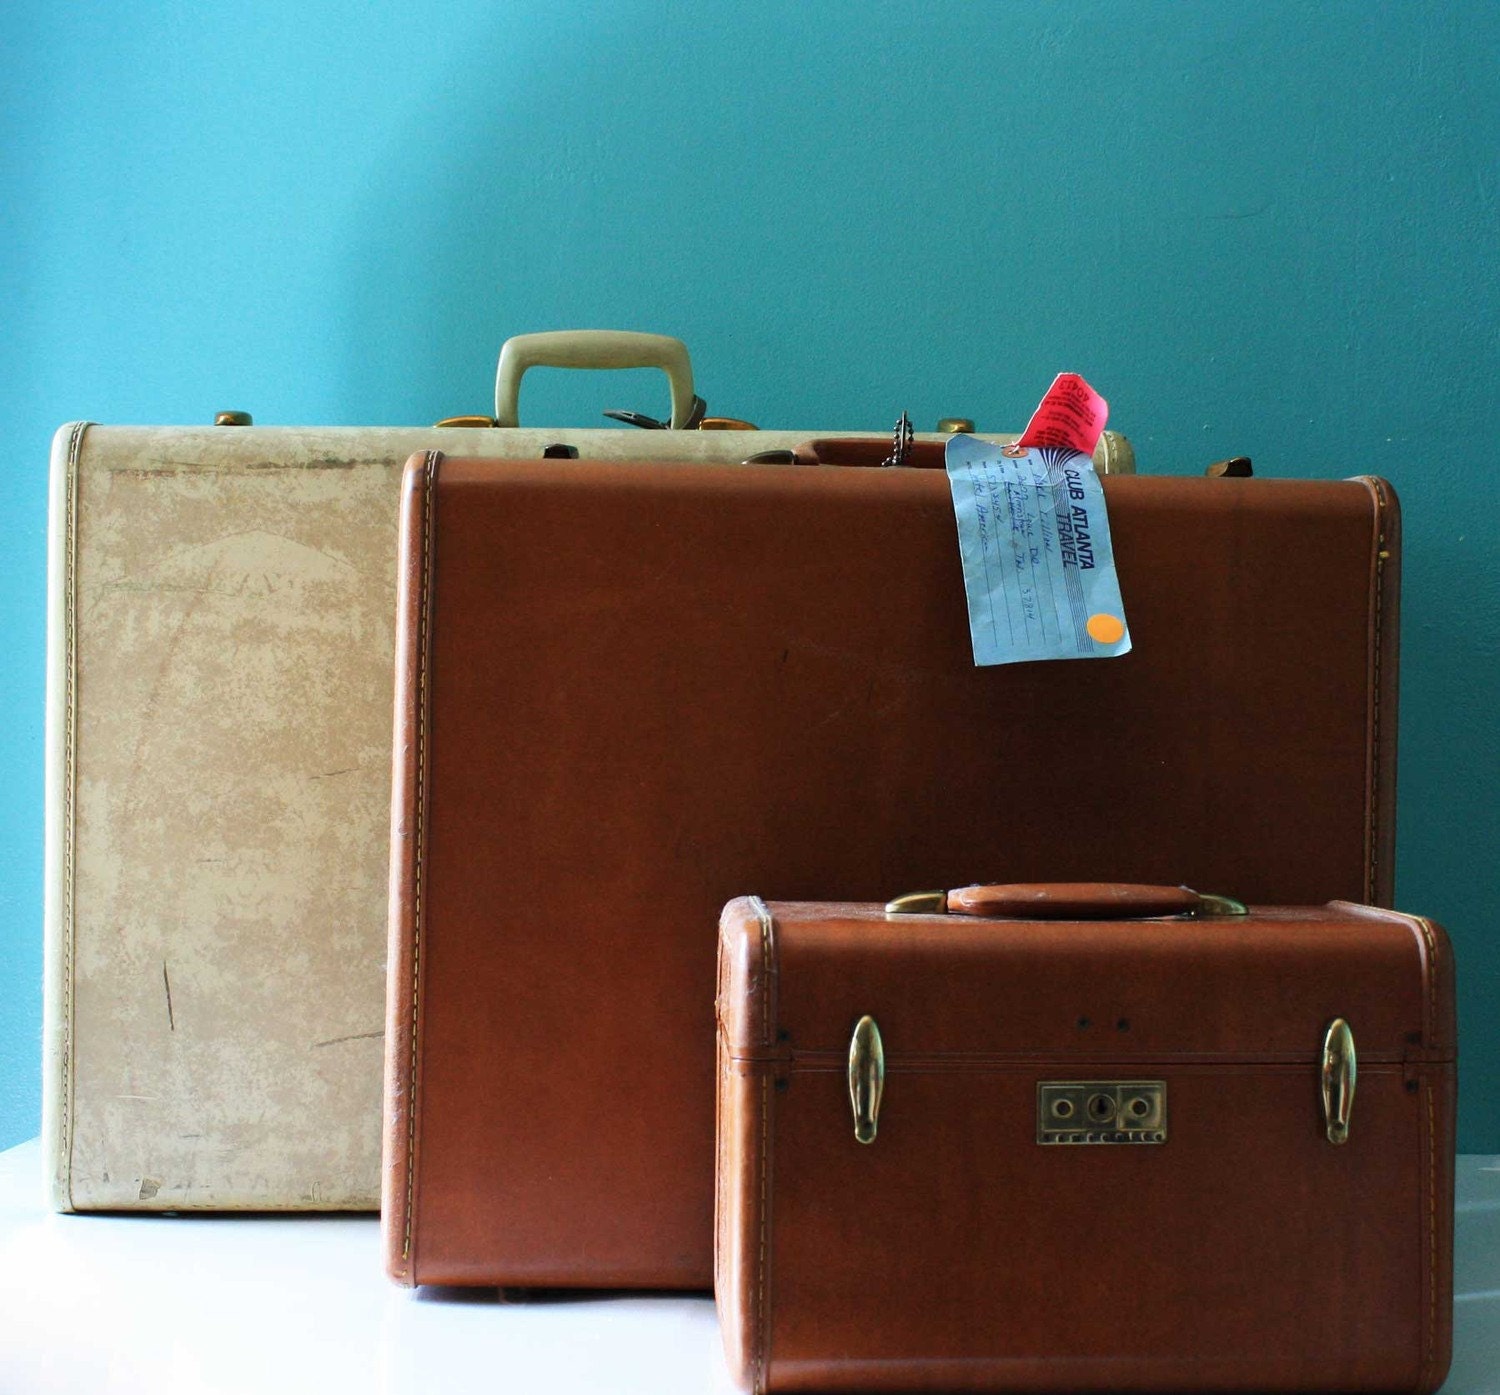 Vintage Luggage Set Two large Suitcases One Train Case Brown Hard Samsonite with Key